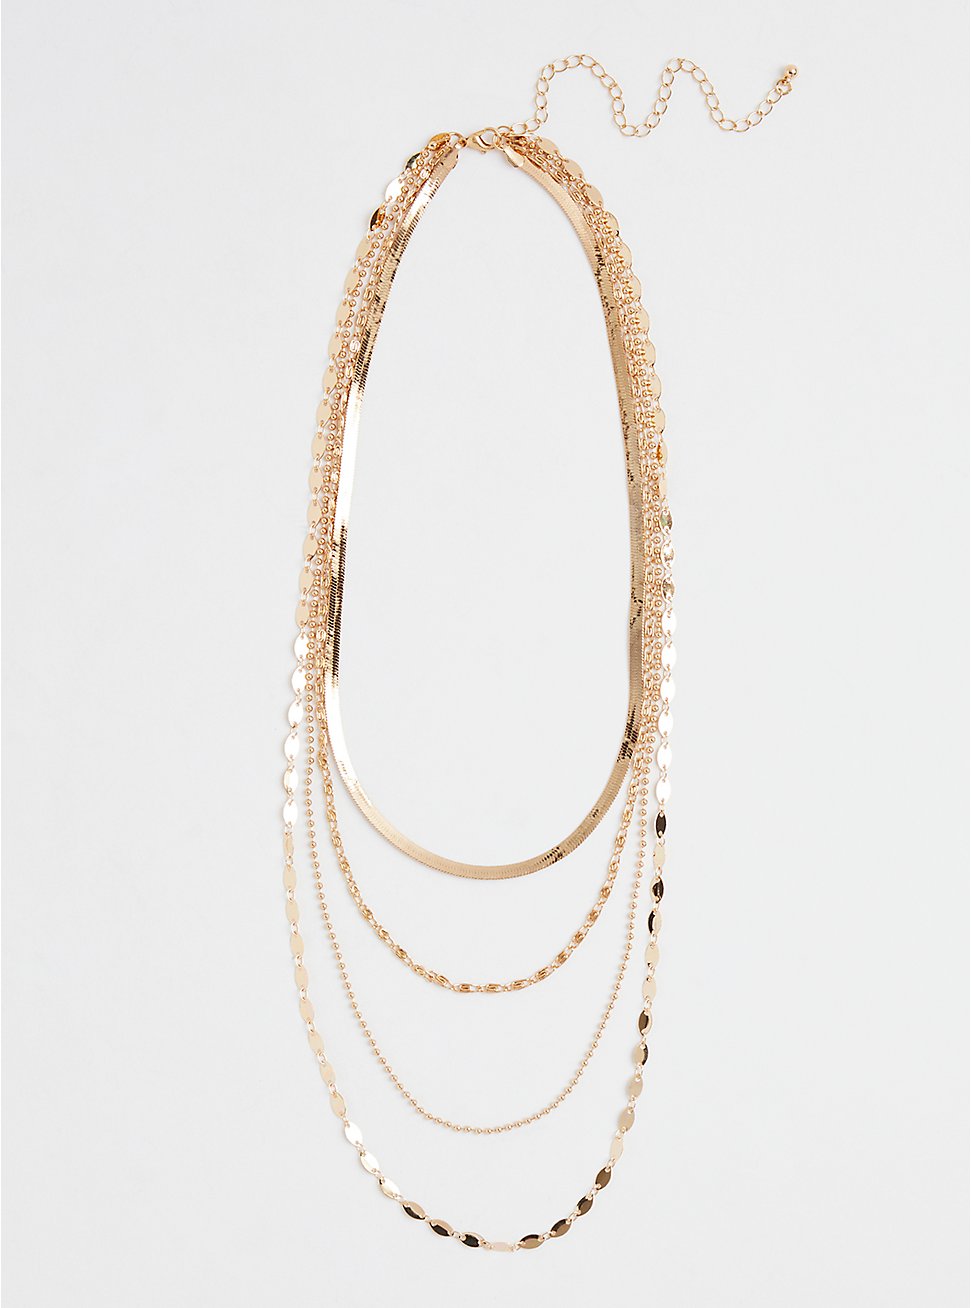 Textured Chain Layered Necklace - Gold Tone, , hi-res